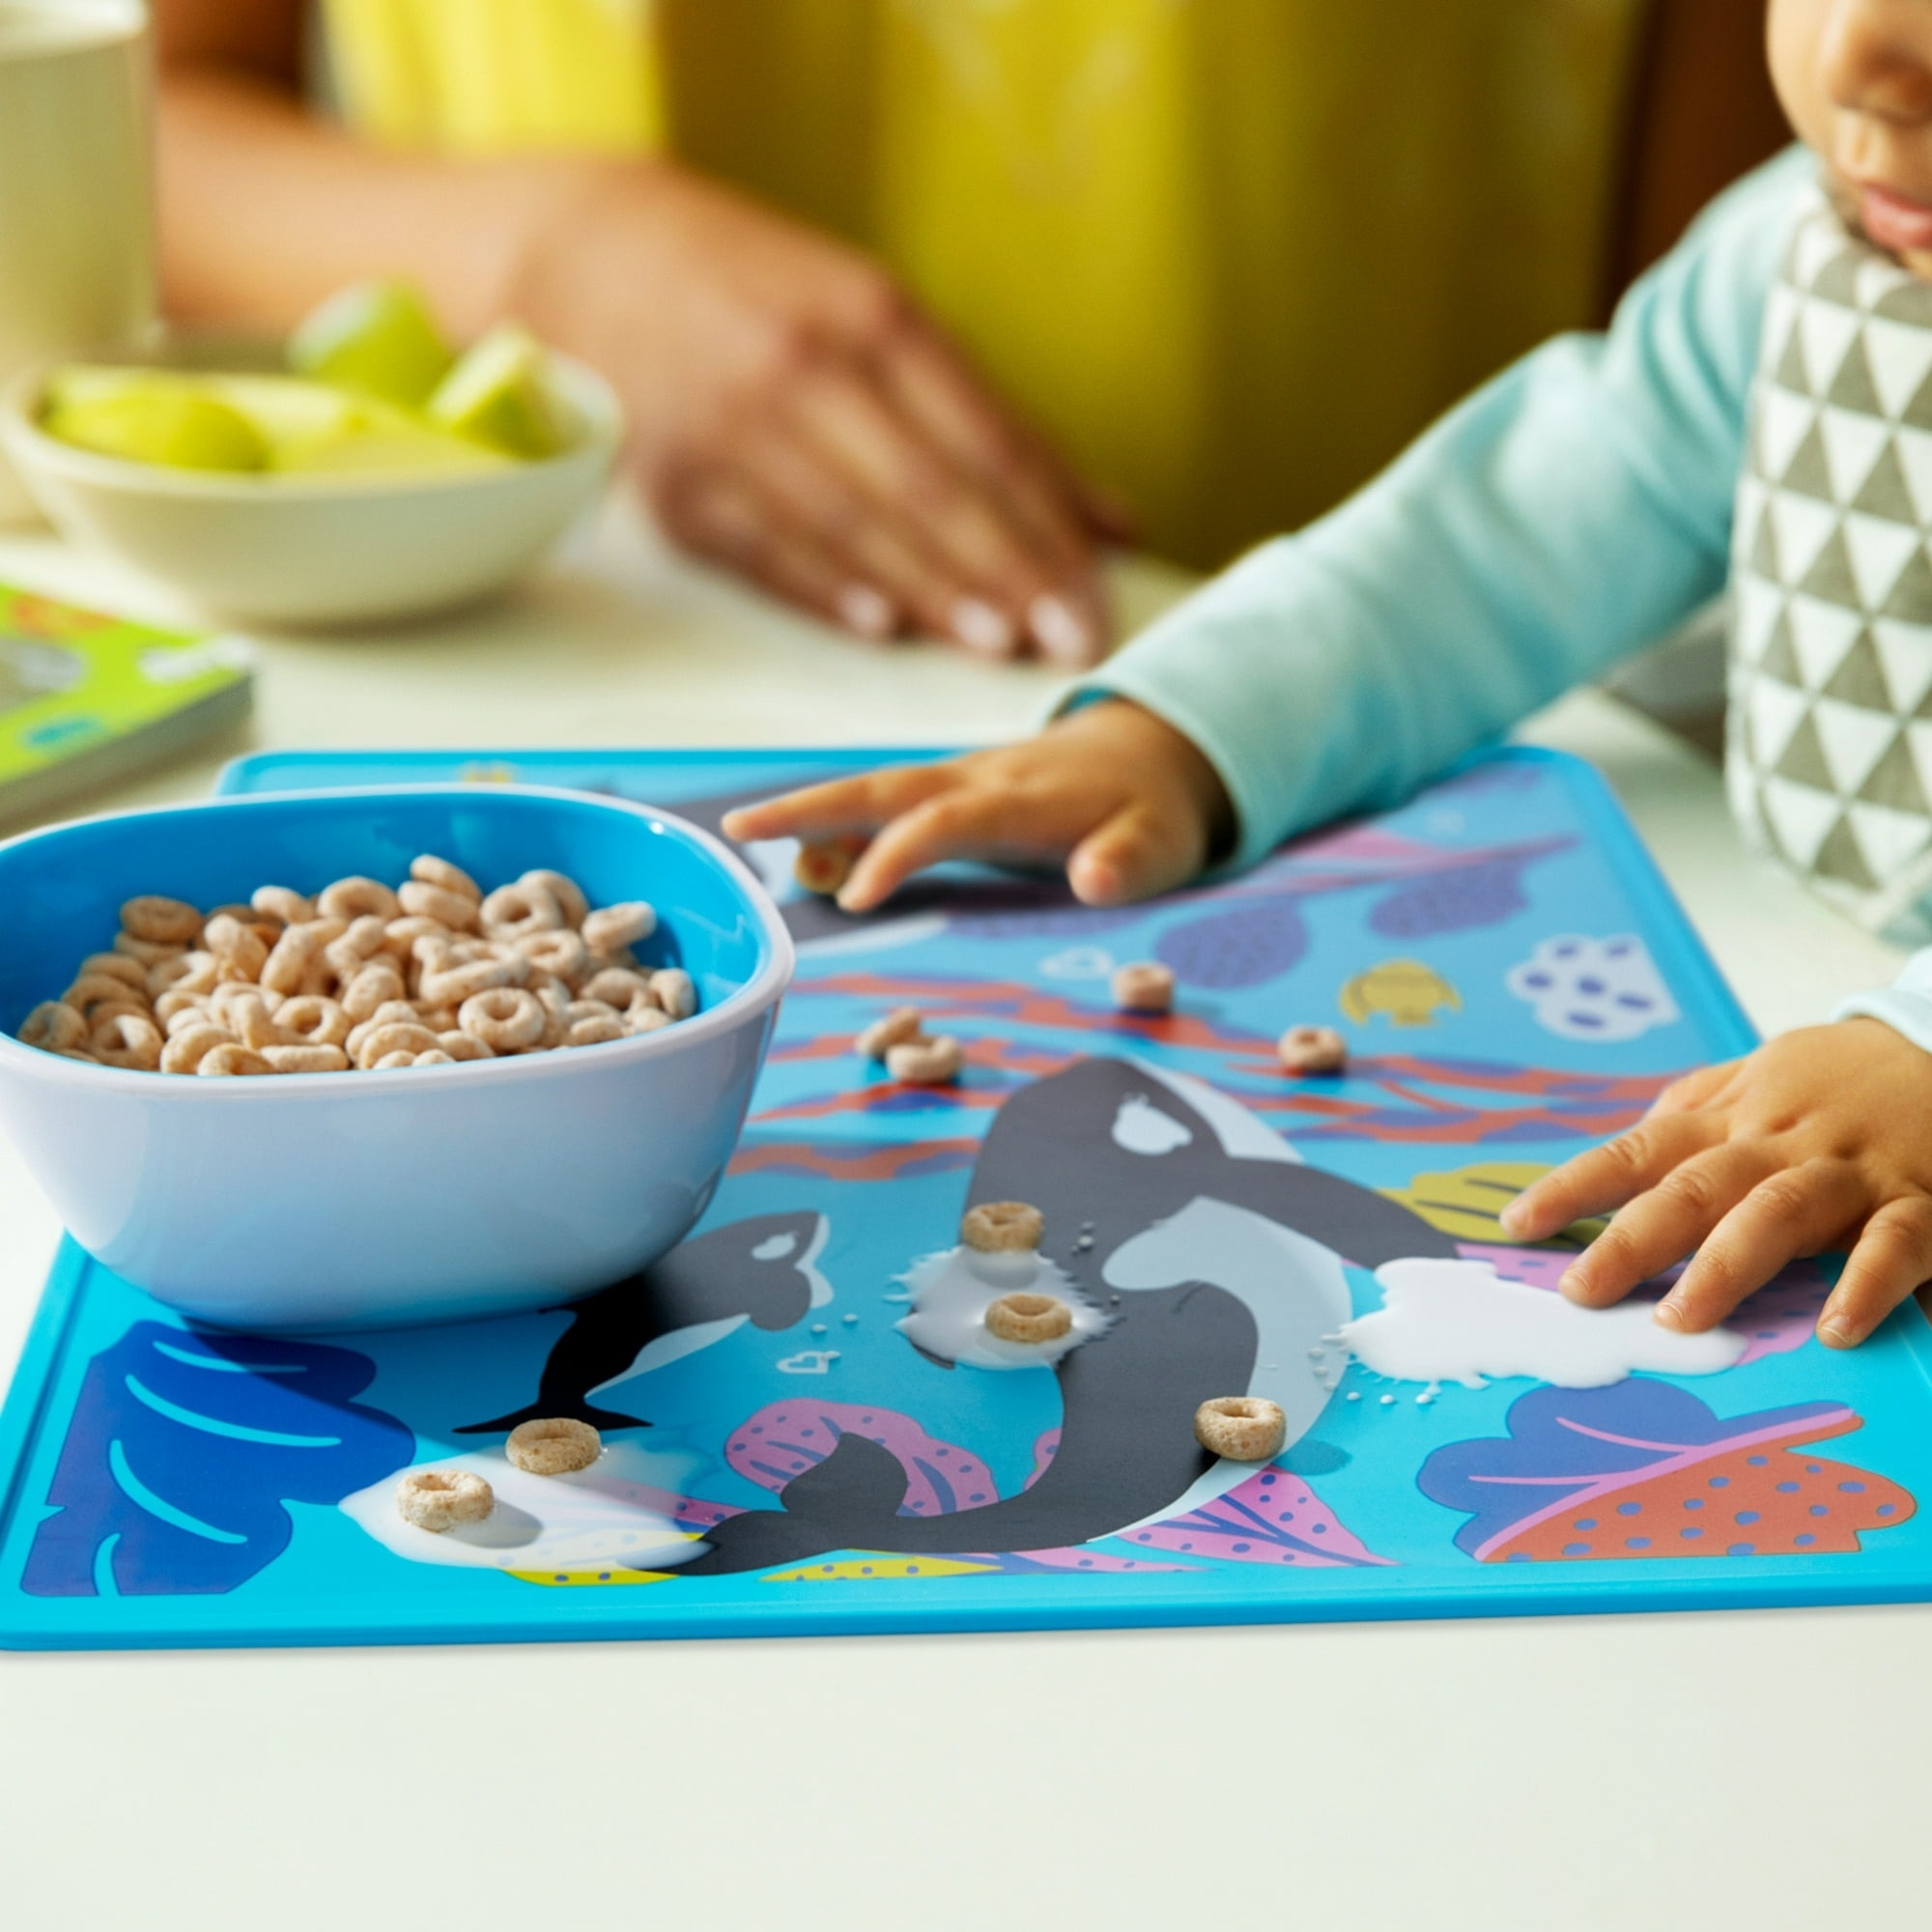 A bowl on a whale placemat